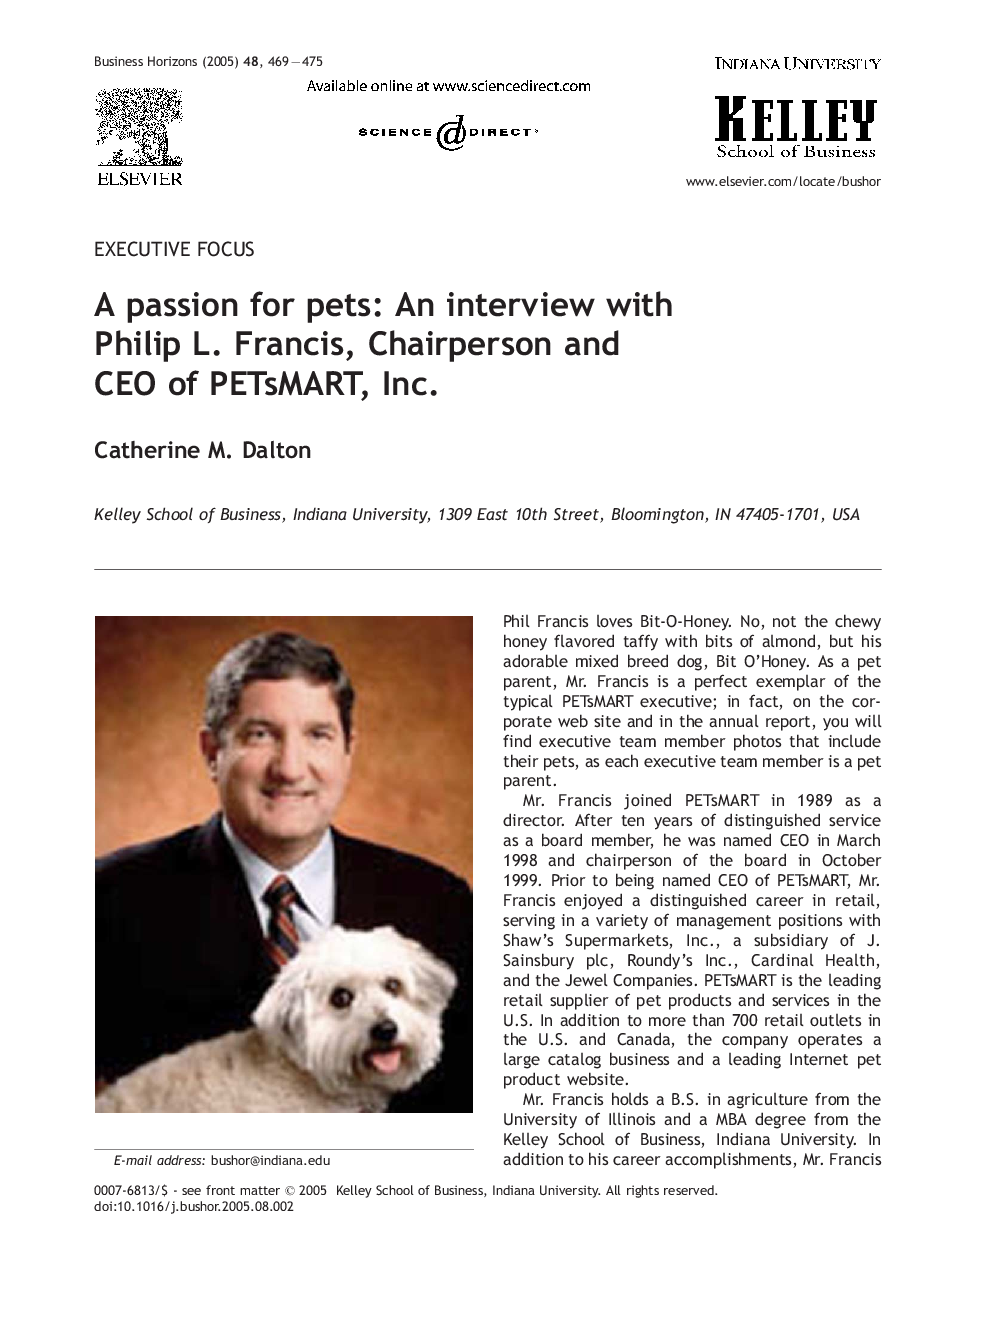 A passion for pets: An interview with Philip L. Francis, Chairperson and CEO of PETsMART, Inc.